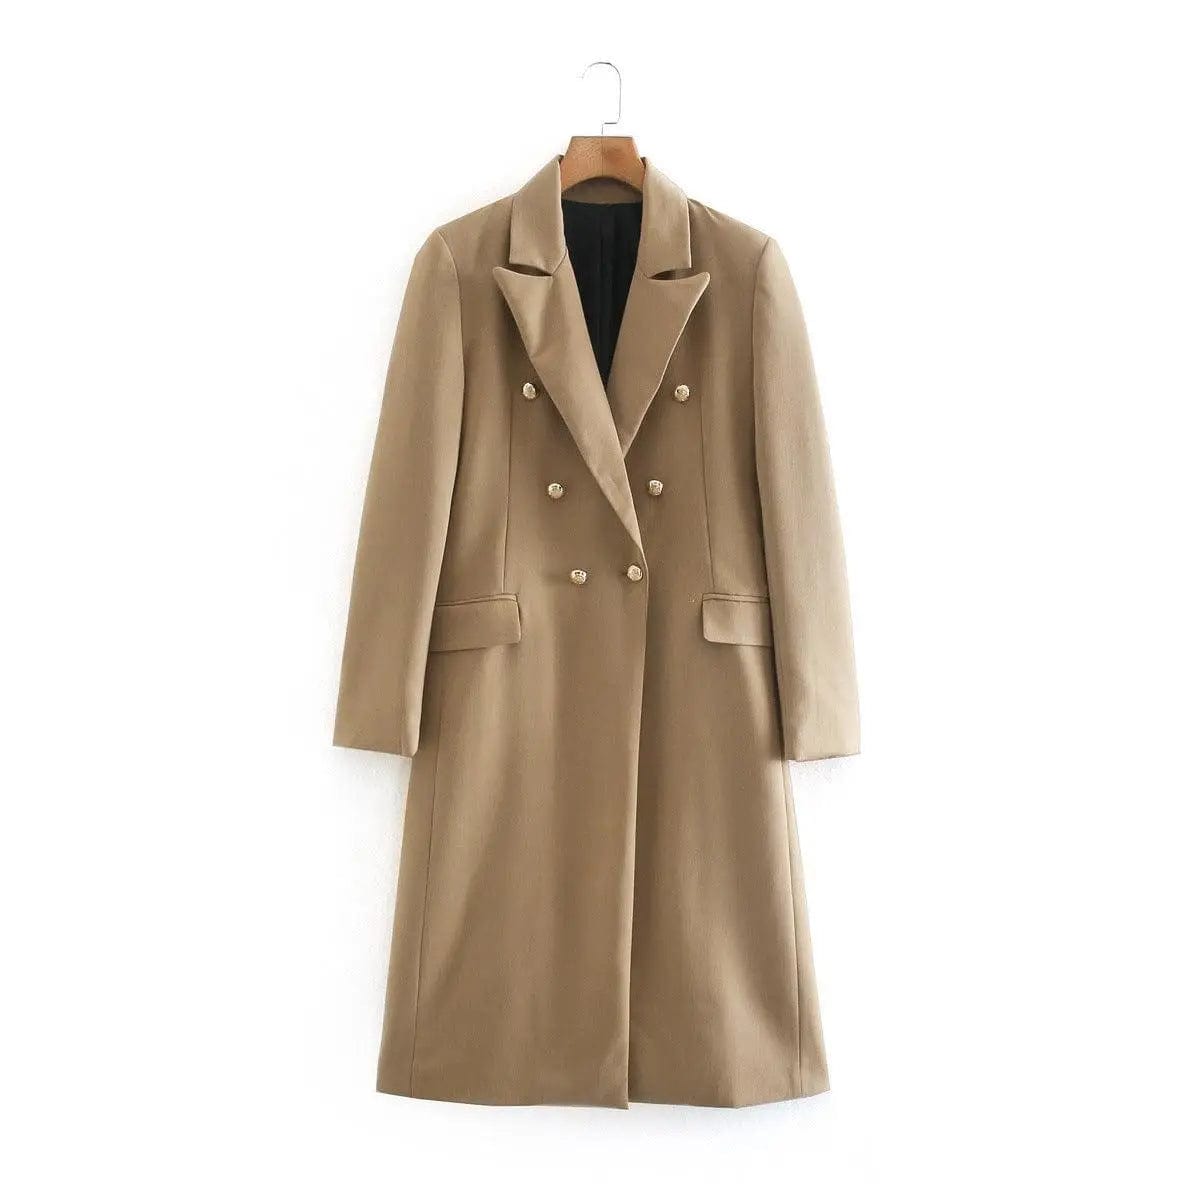 LOVEMI  Coats picture color / S Lovemi -  New Autumn And Winter Women'S Double-Breasted Woolen Coat